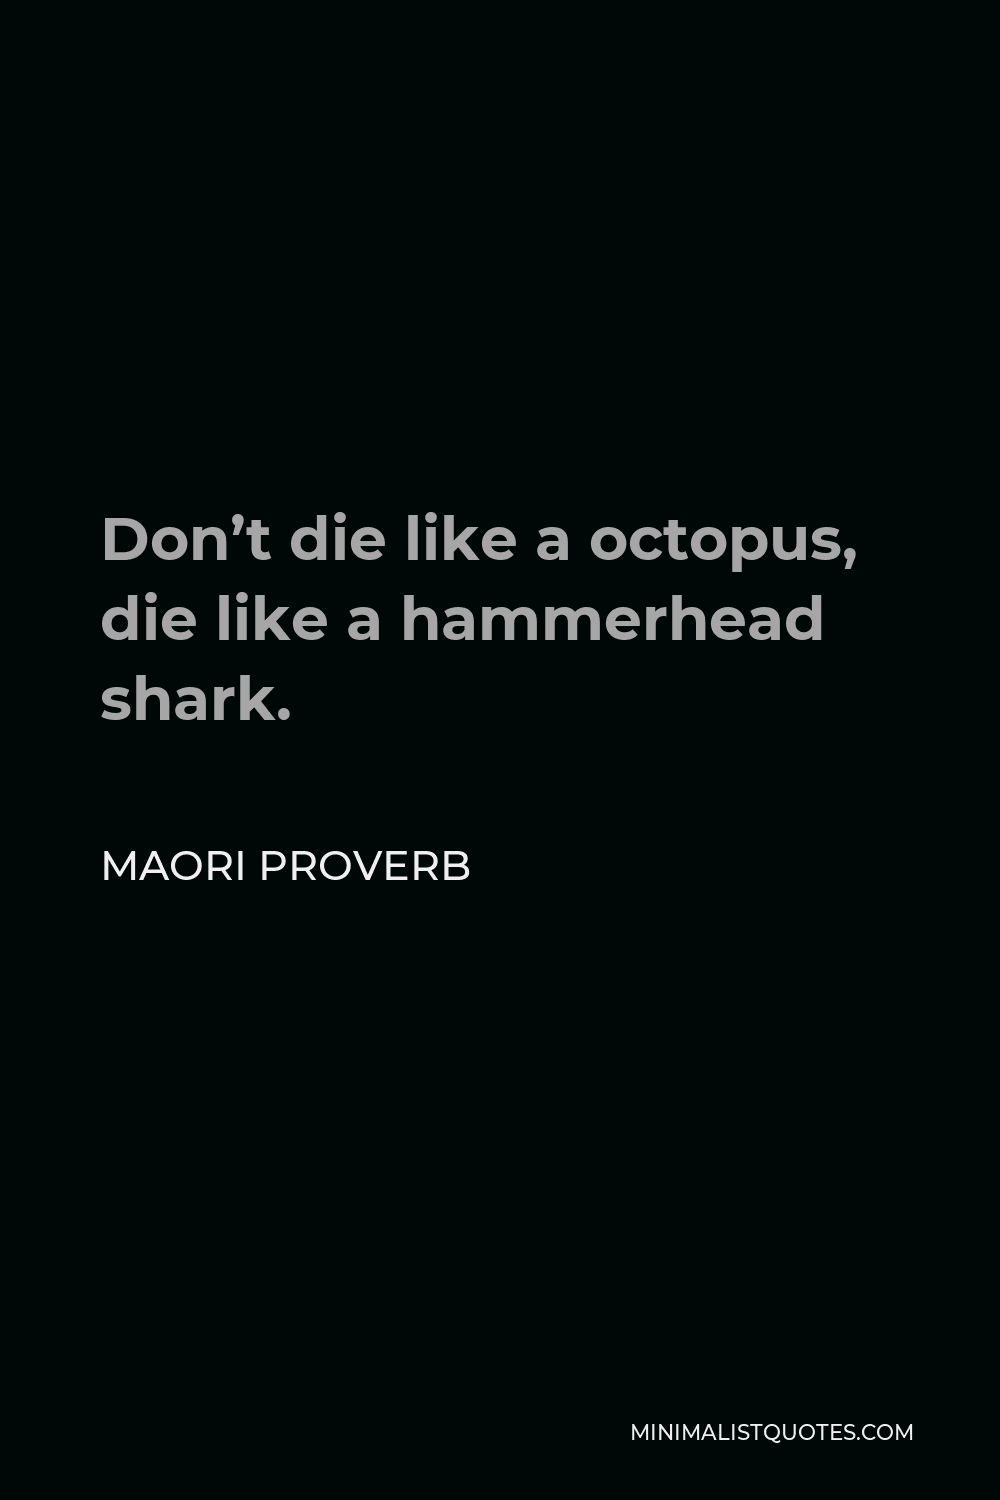 Maori Proverb Quote - Don’t die like a octopus, die like a hammerhead shark.